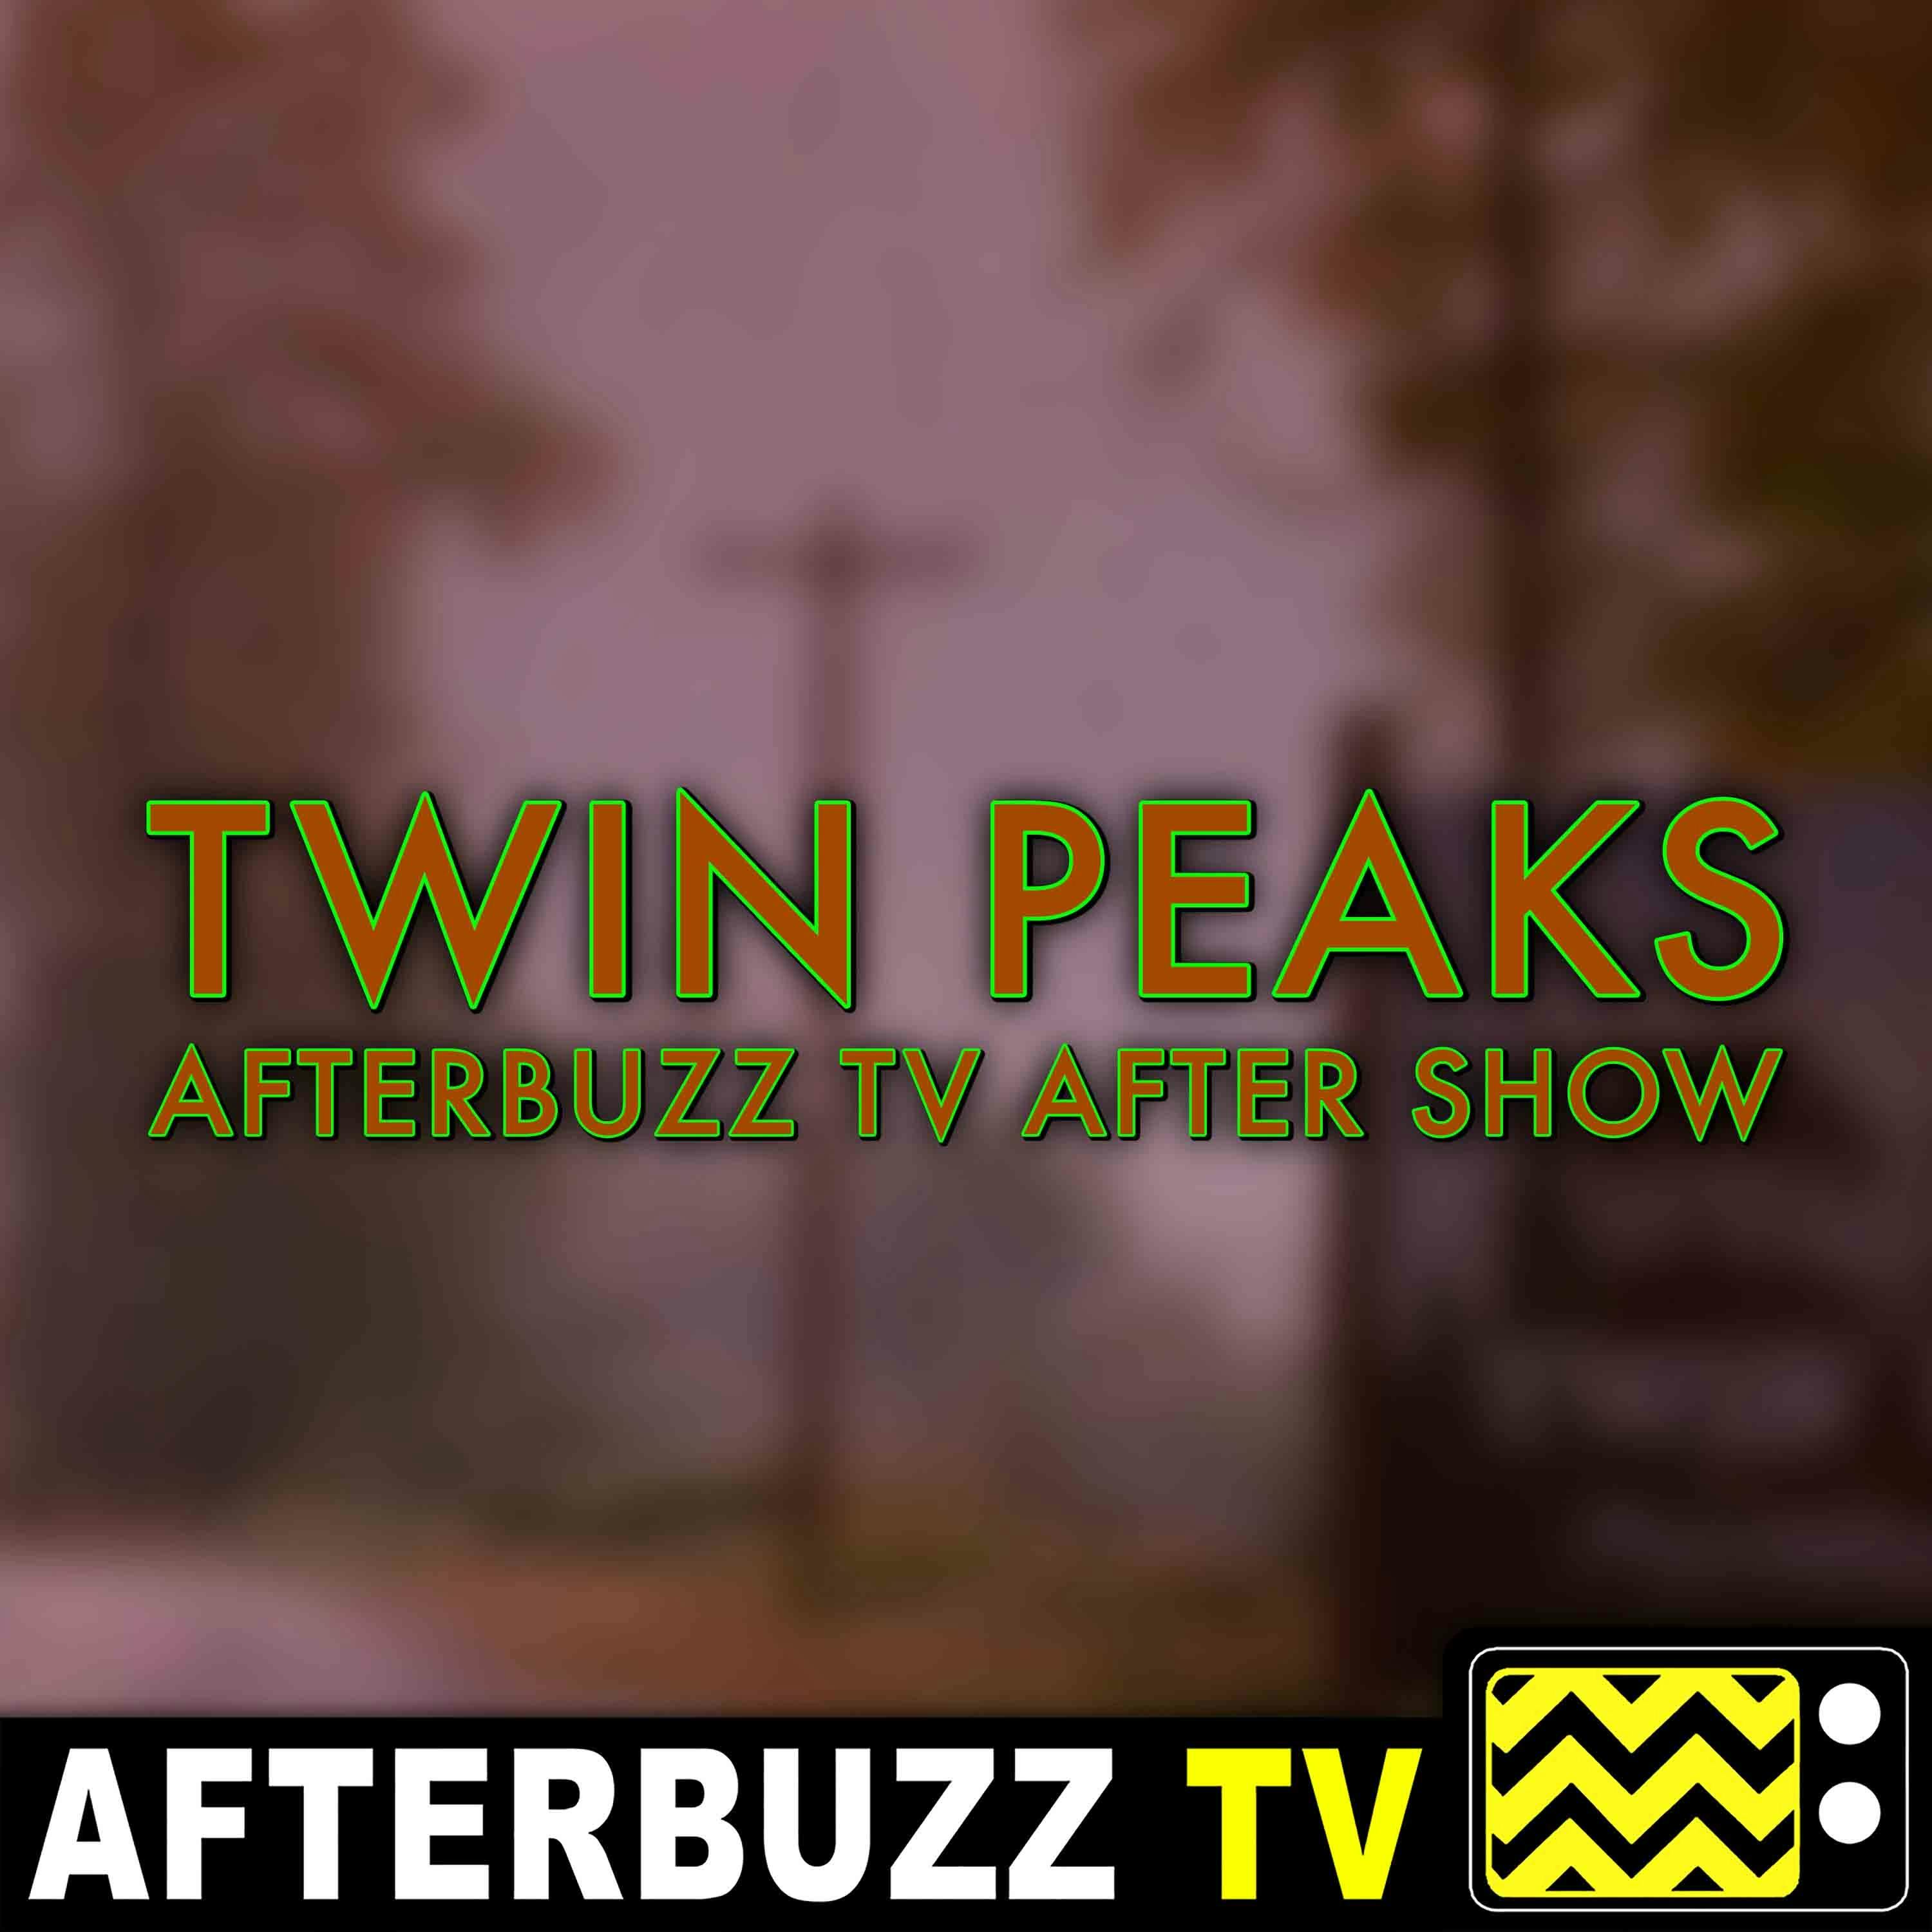 Twin Peaks S:1 | The Return: Part 11 E:11 | AfterBuzz TV AfterShow